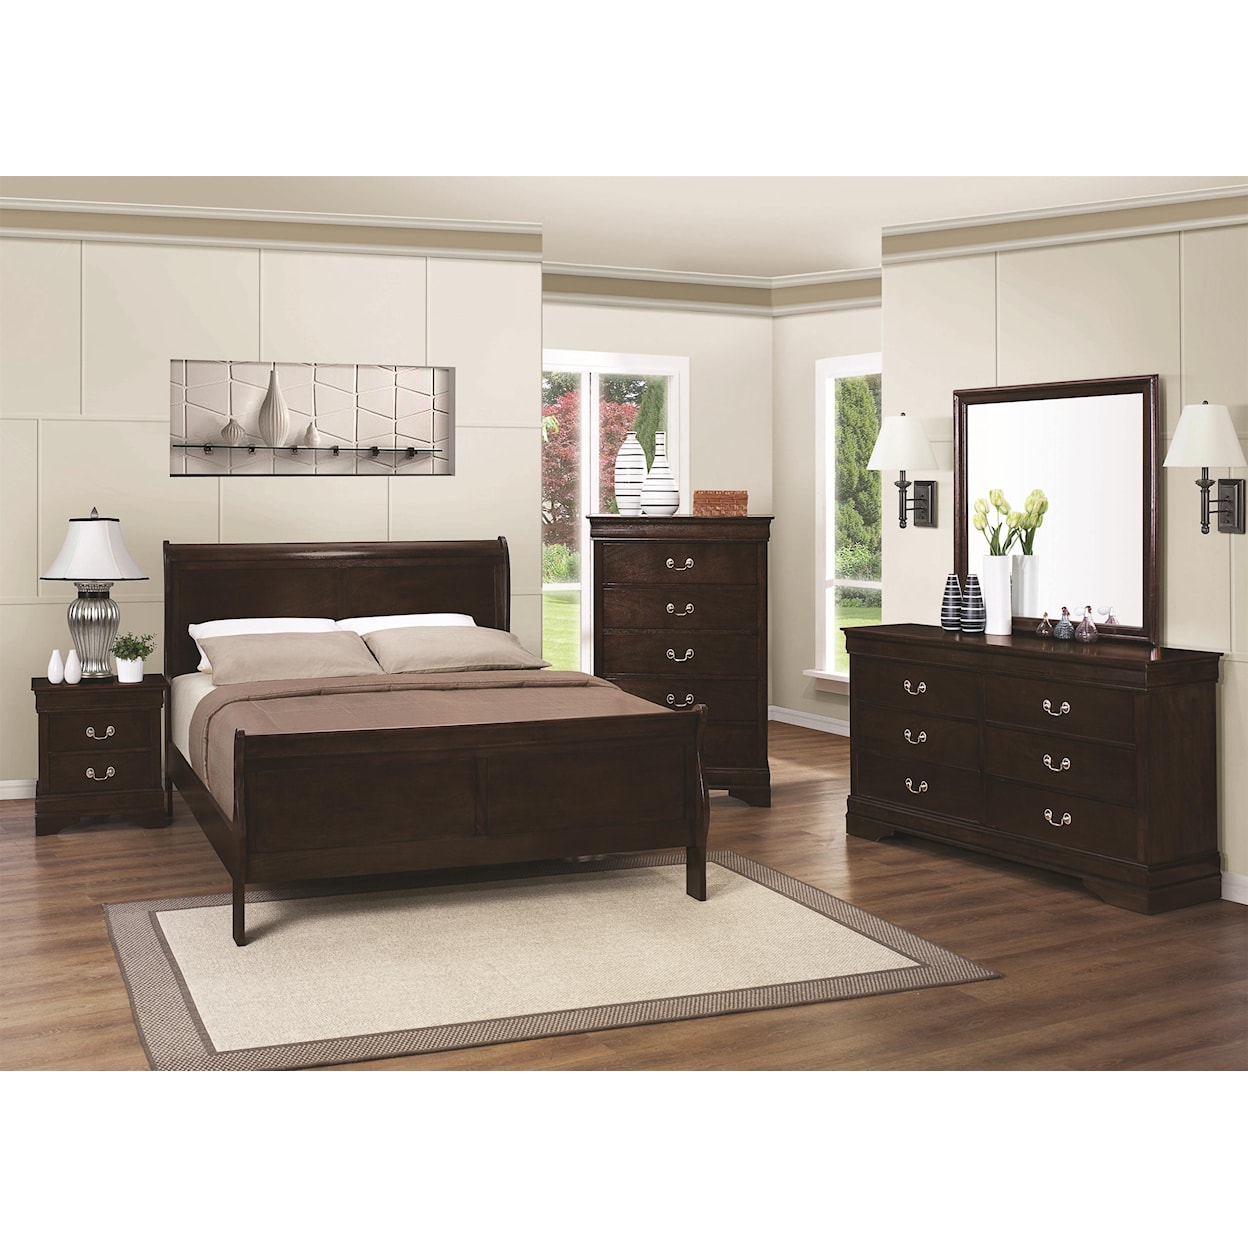 Coaster Louis Philippe 202 Twin Bedroom Group